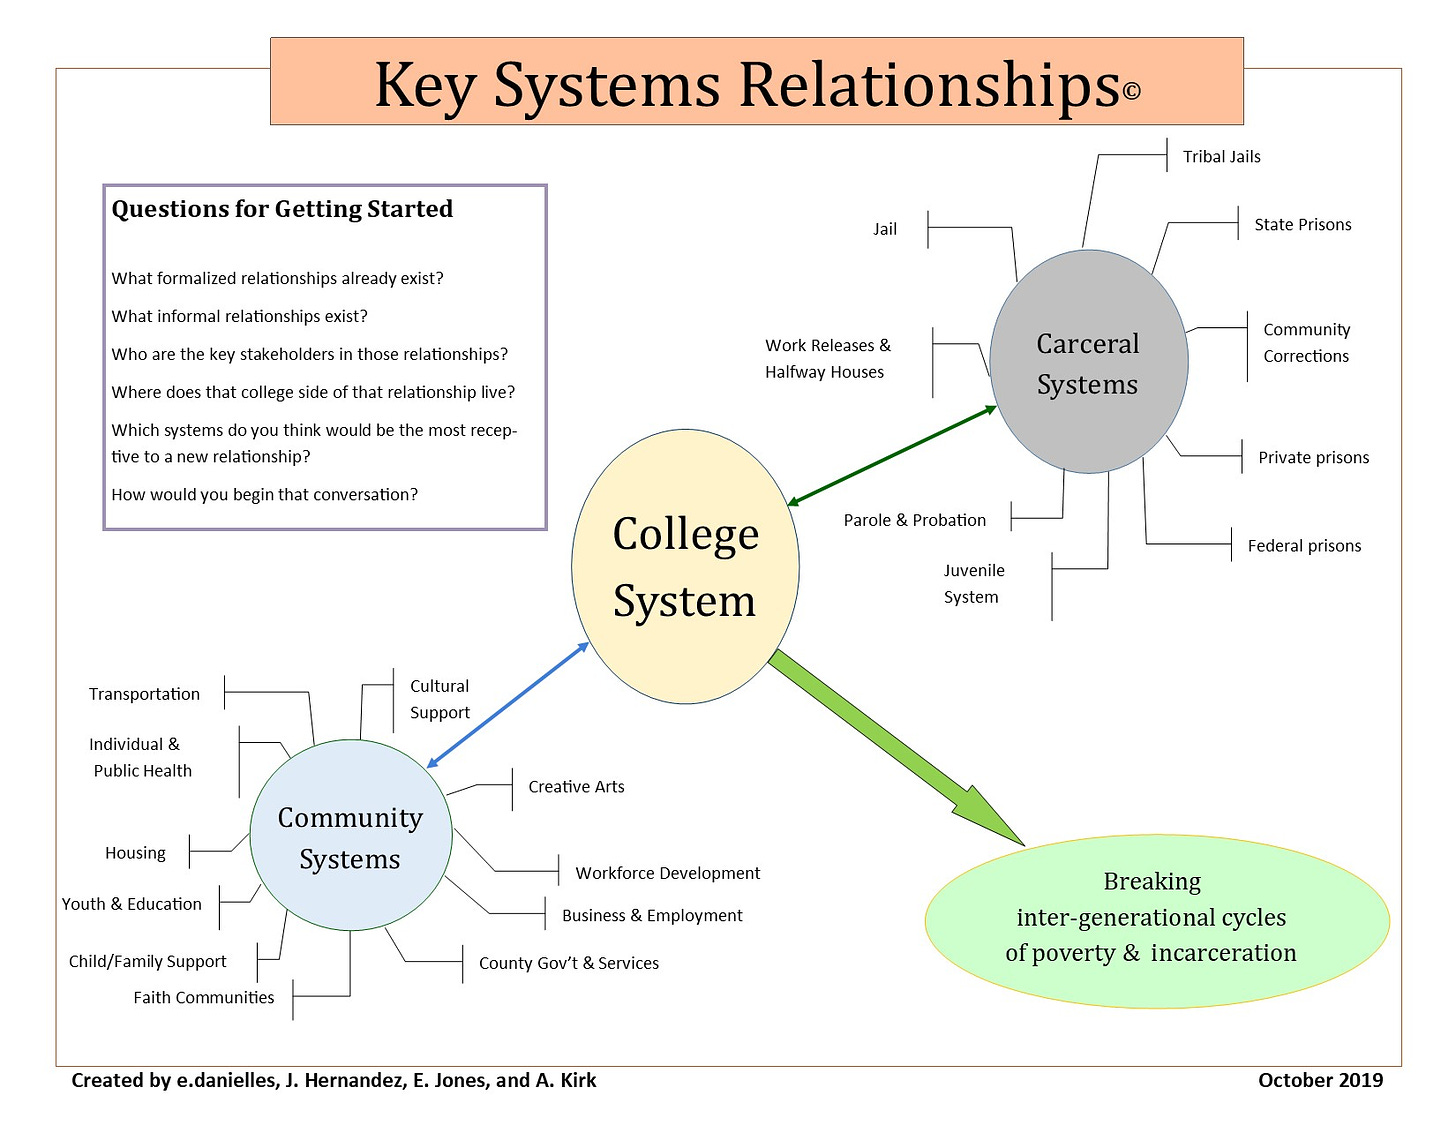 I'm so sorry, dear reader, I don't know how to describe this very well.  It is a diagram with three circles reprsenting the college, community systems, and carceral systems, with the college in the middle.  there are several questions for getting started which I will put in the text.